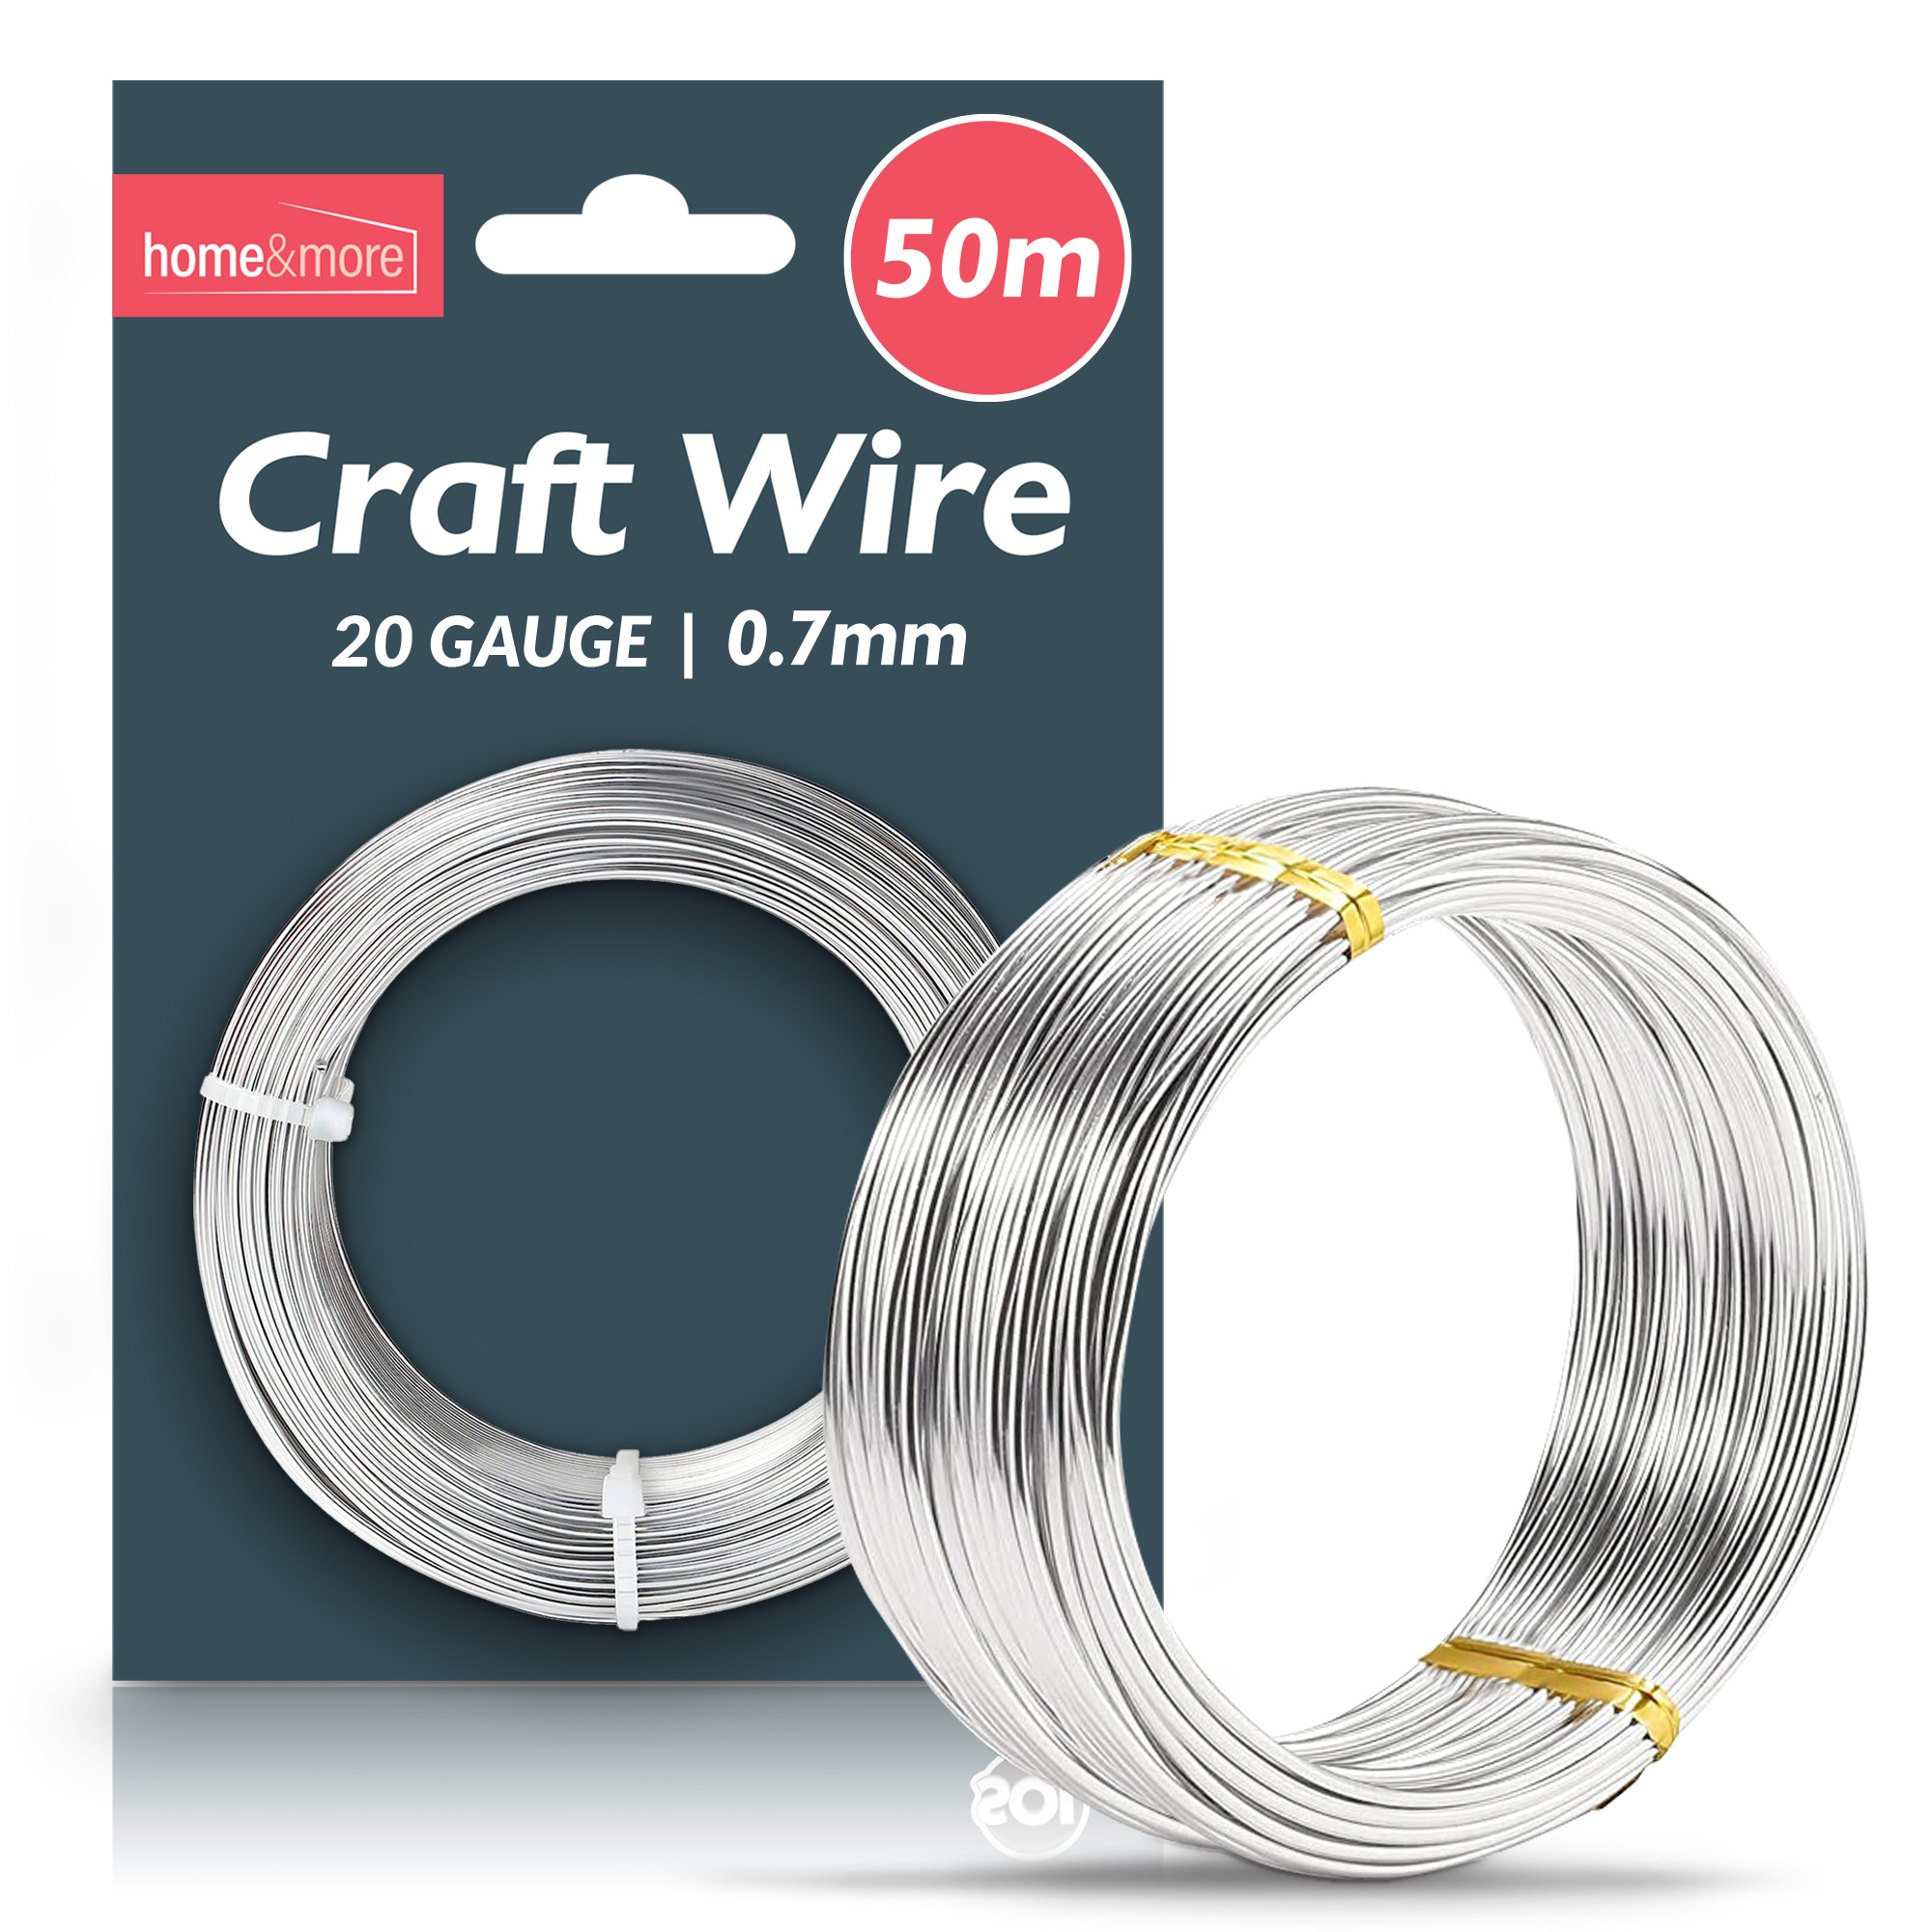 Wholesale Craft Wire From China – Various Gauges & Colors